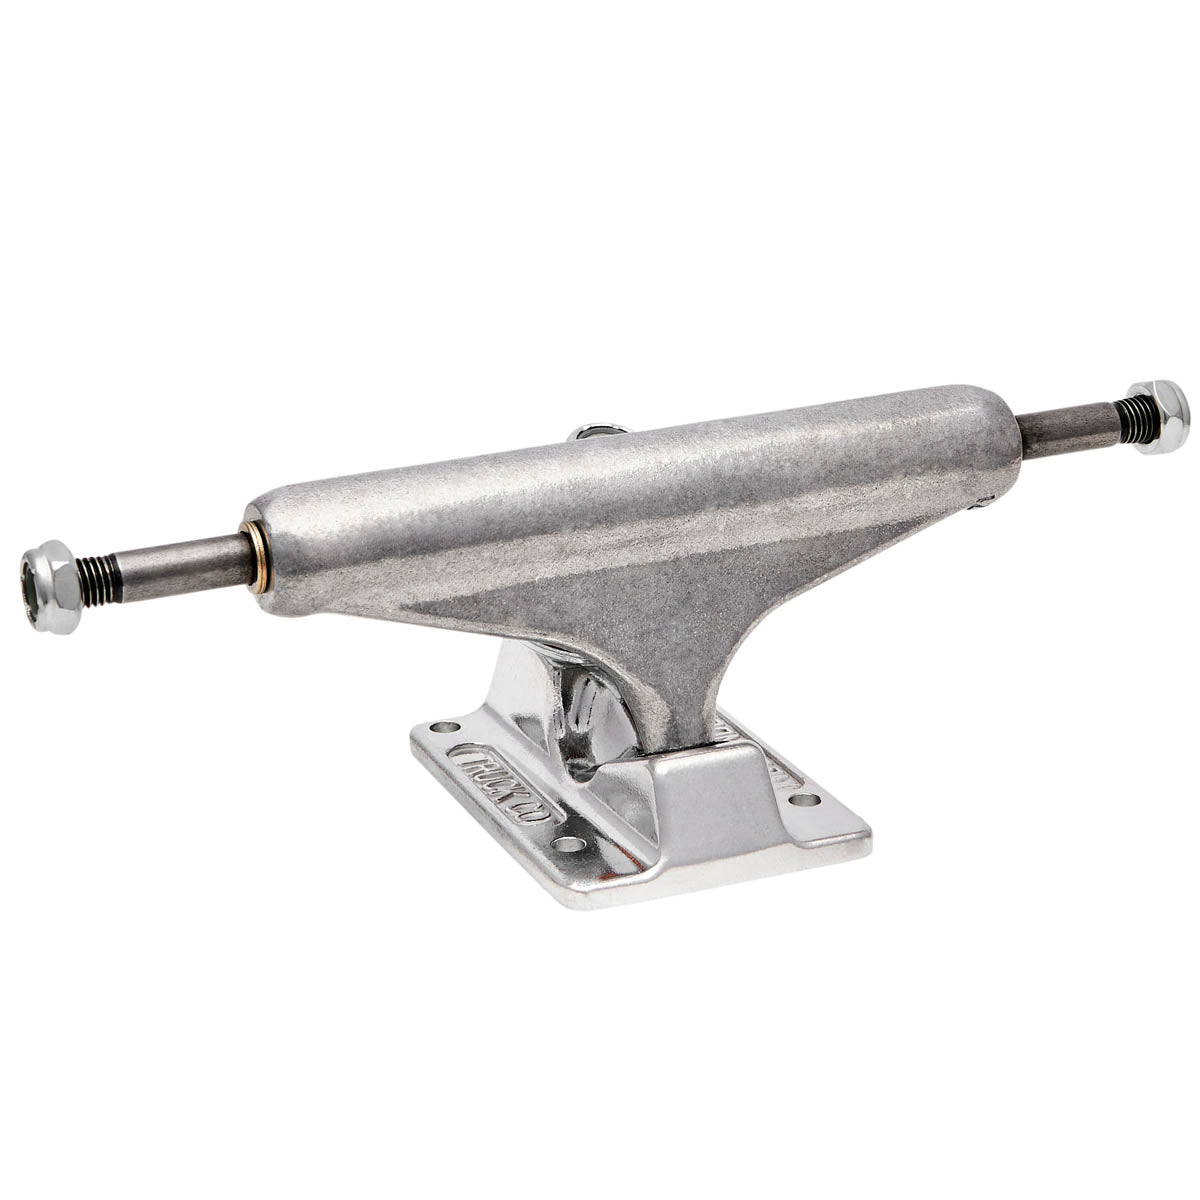 Independent Stage 11 Forged Hollow Standard Skateboard Trucks - Silver image 1